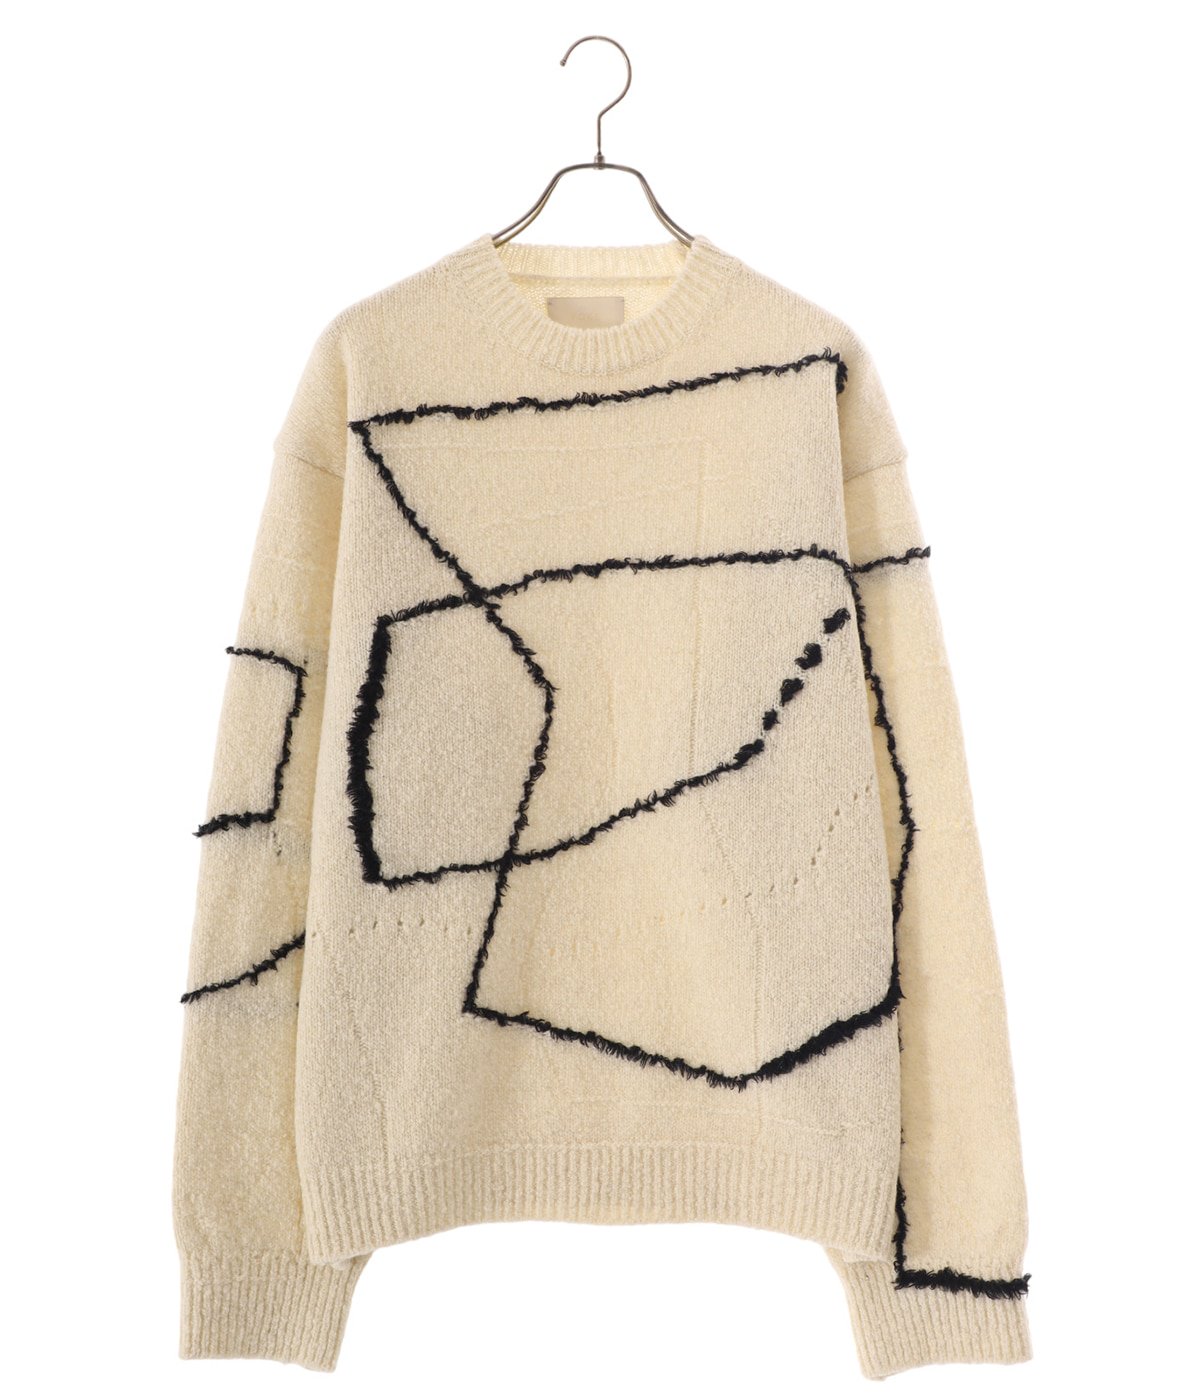 CONTINUOUS LINE EMBROIDERY SWEATER | YOKE(ヨーク) / トップス